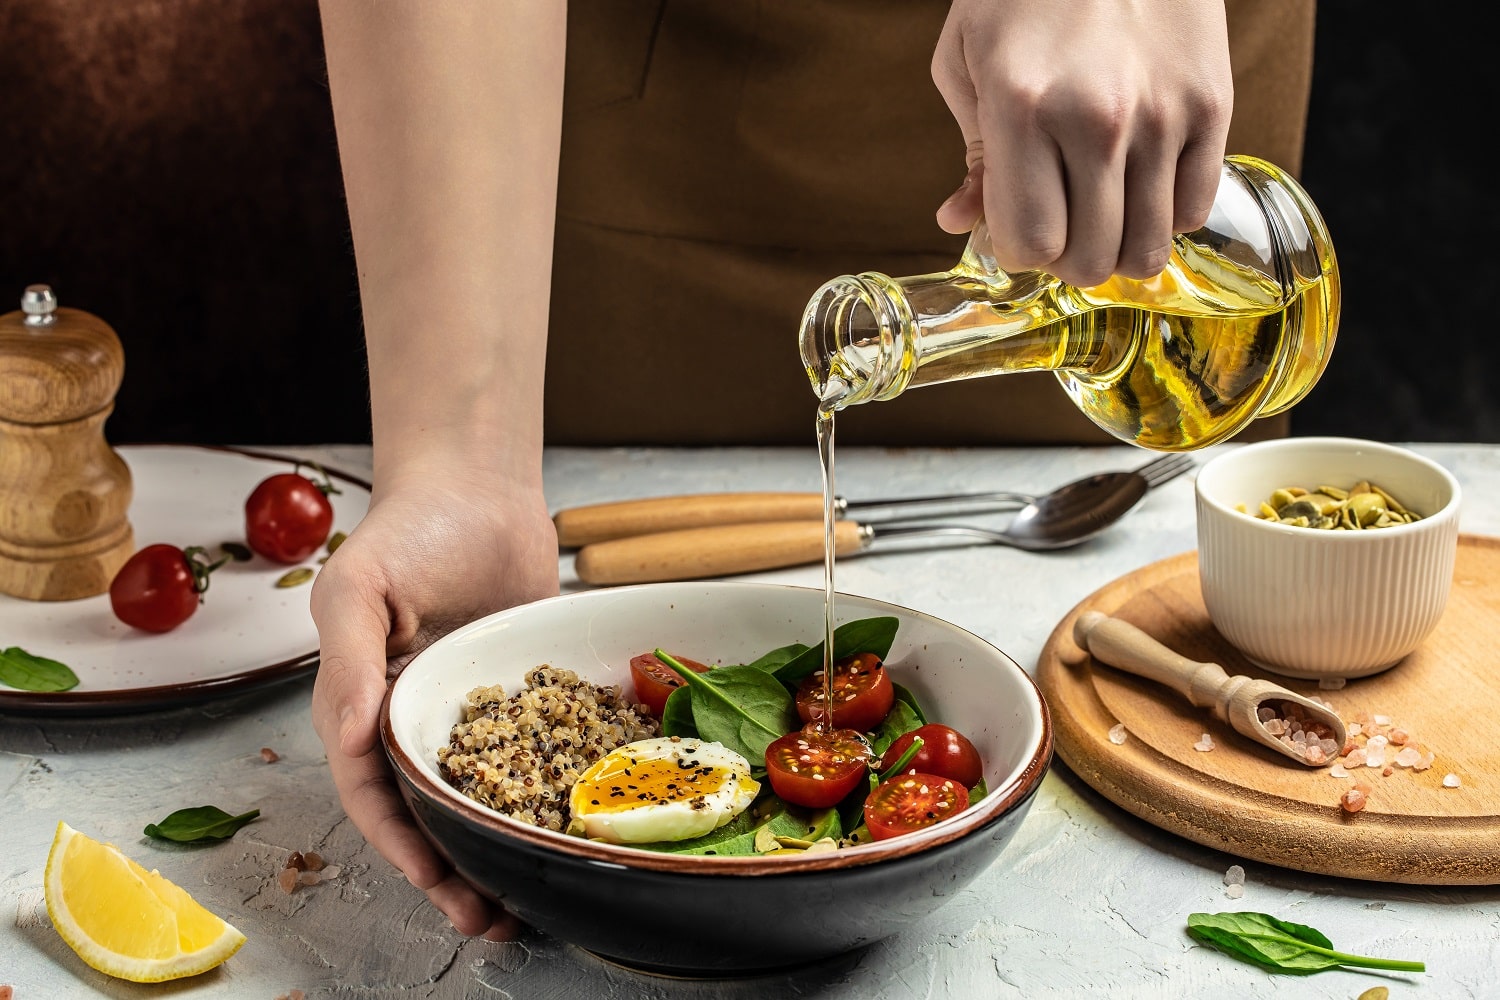 Olive Oil Nutrition Facts